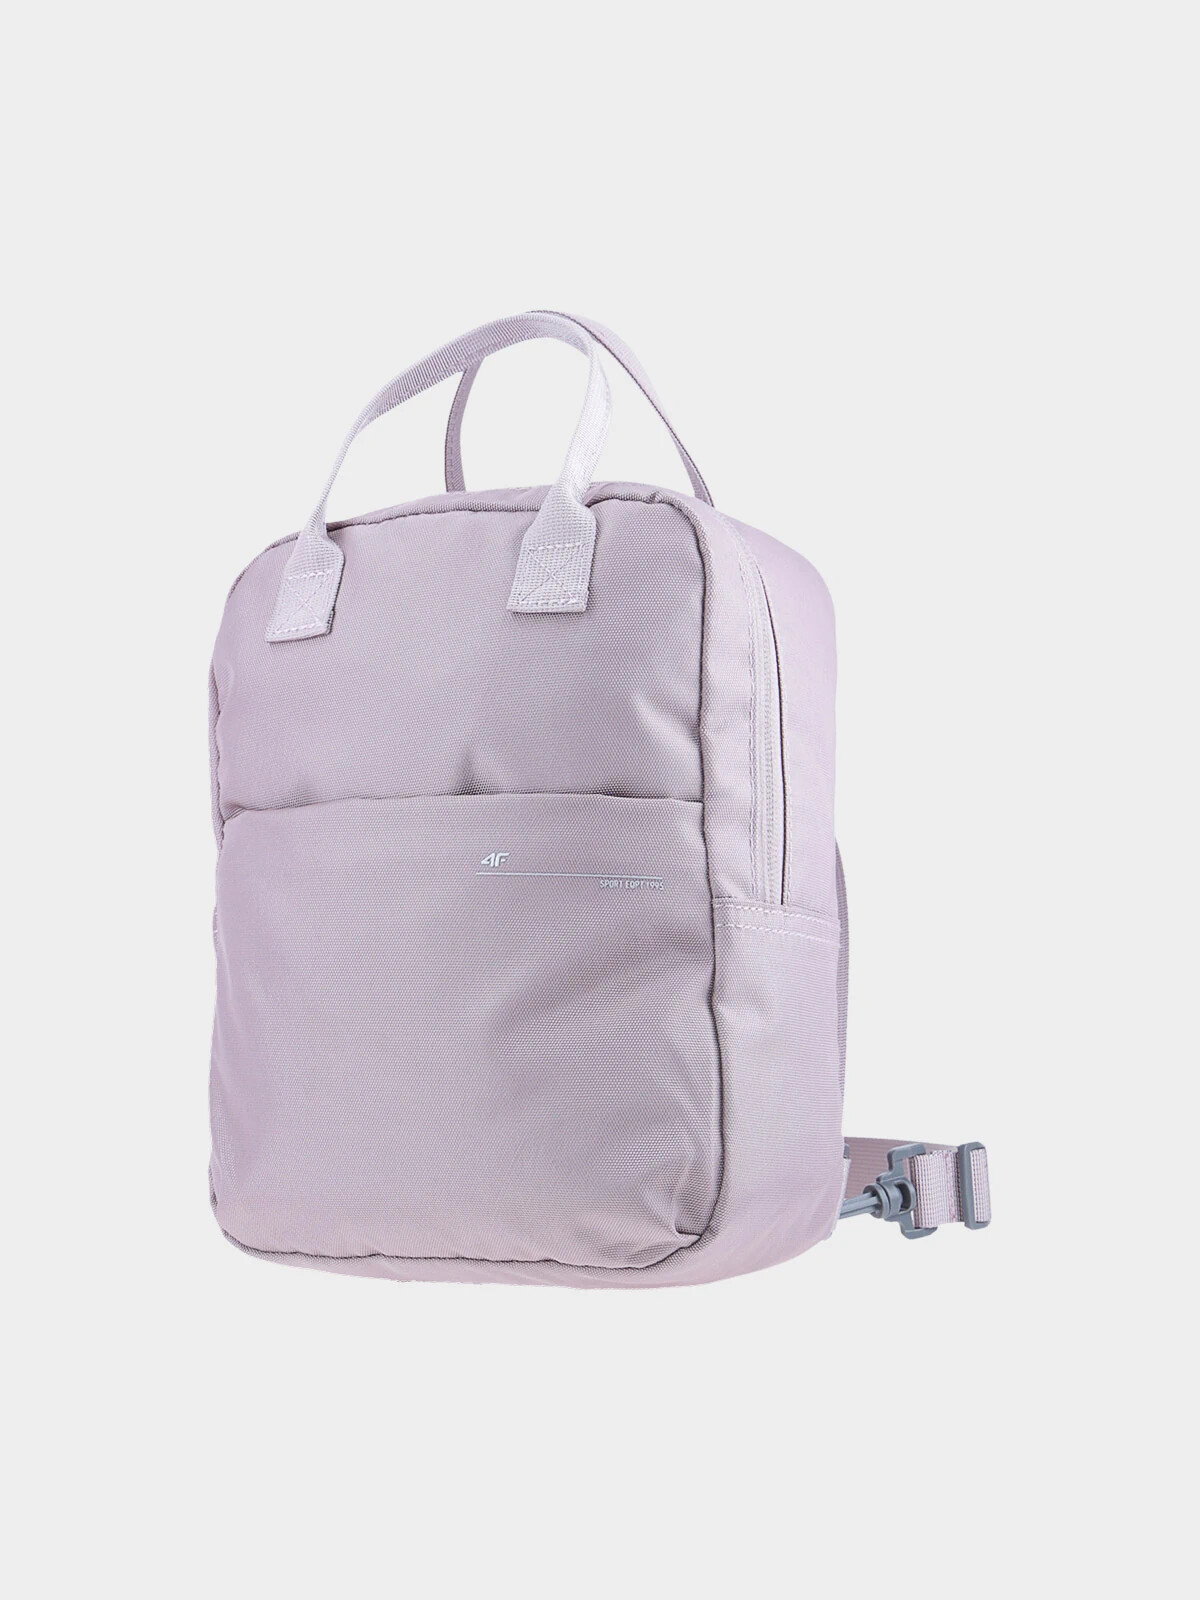 City backpack (approx. 5 L) 4F - powder pink